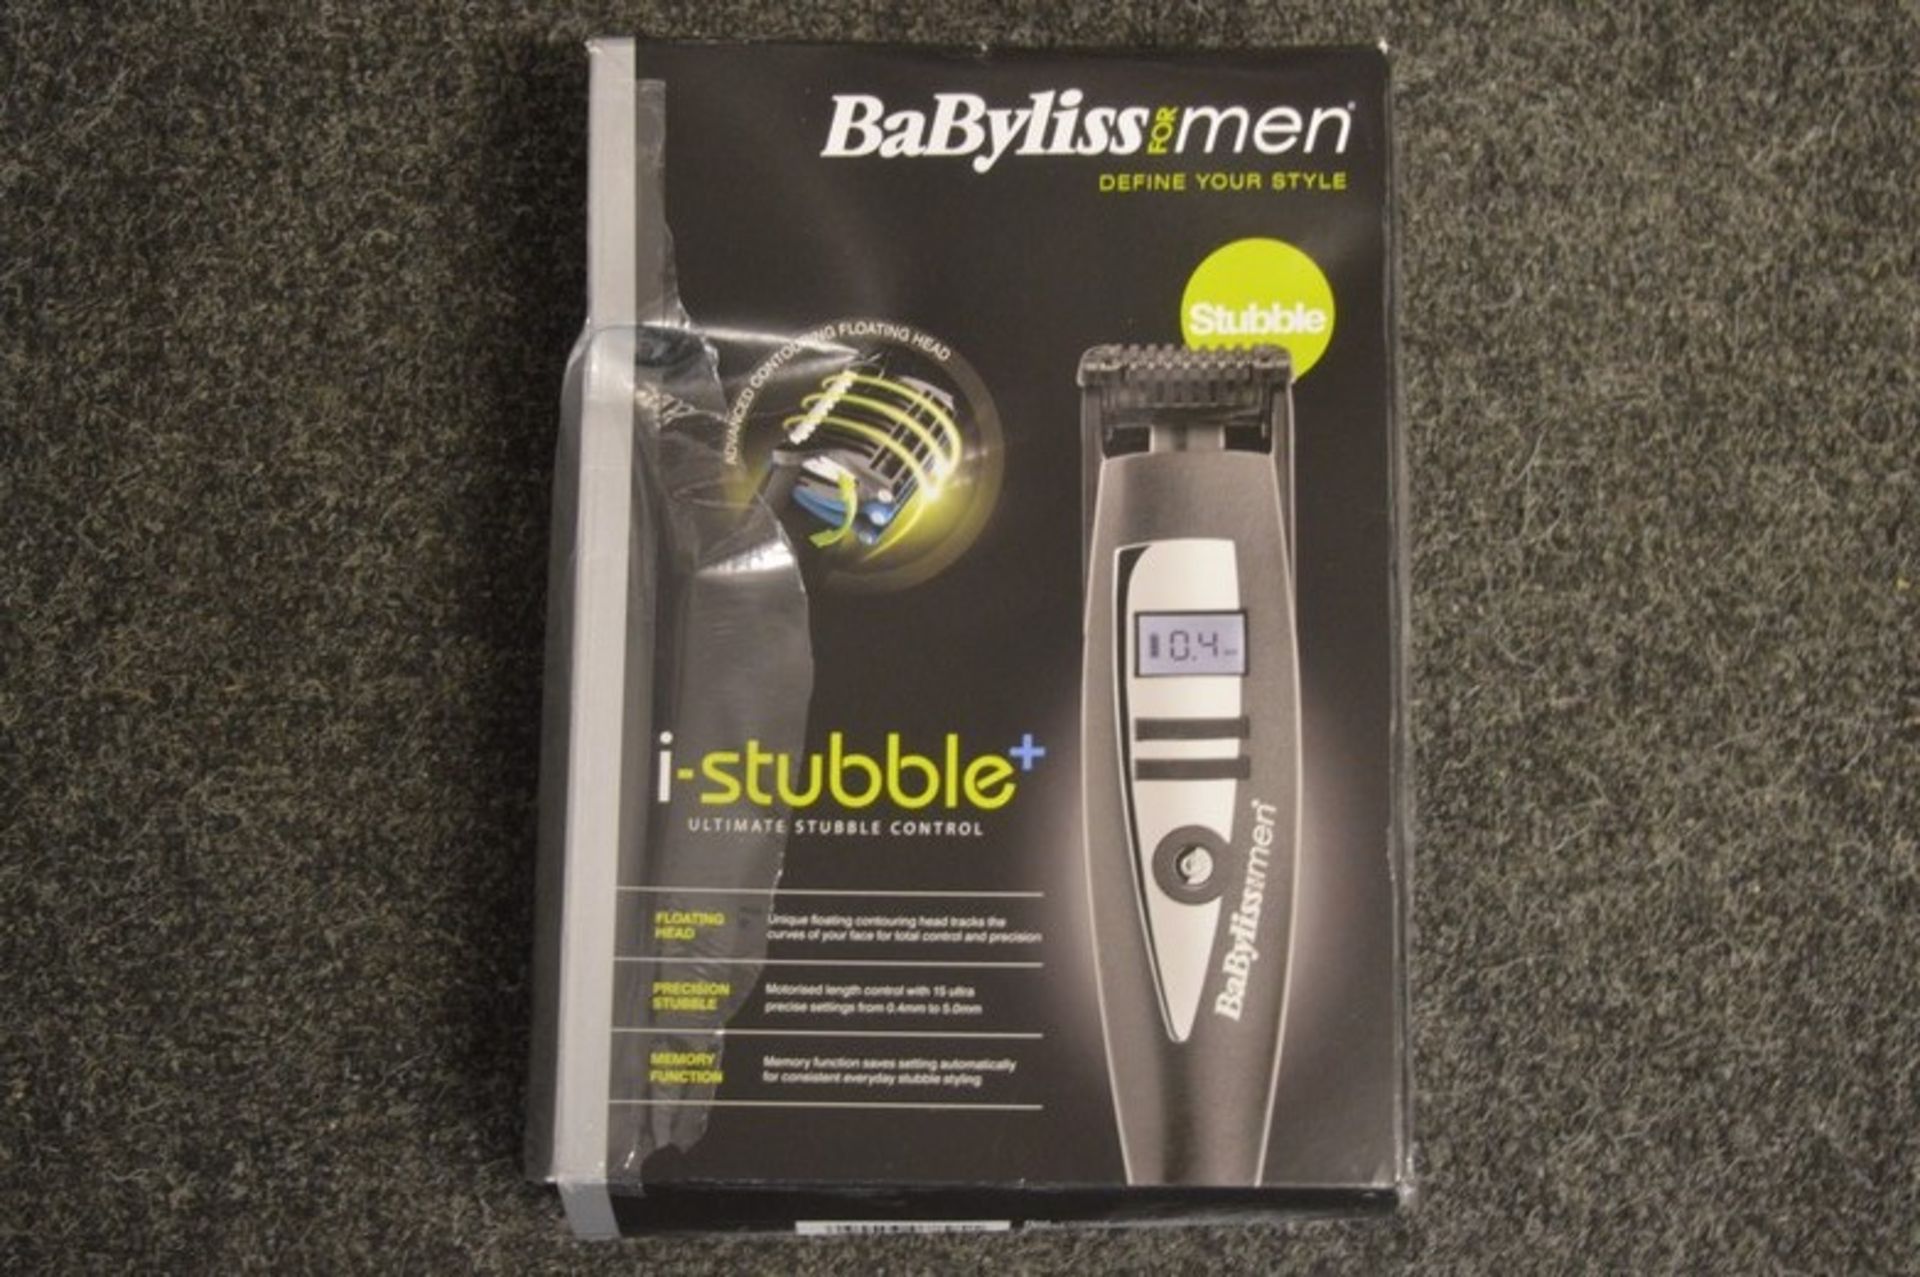 BOXED BABYLISS FOR MEN ISTUBBLE SHAVER RRP £60.00 15/10/15